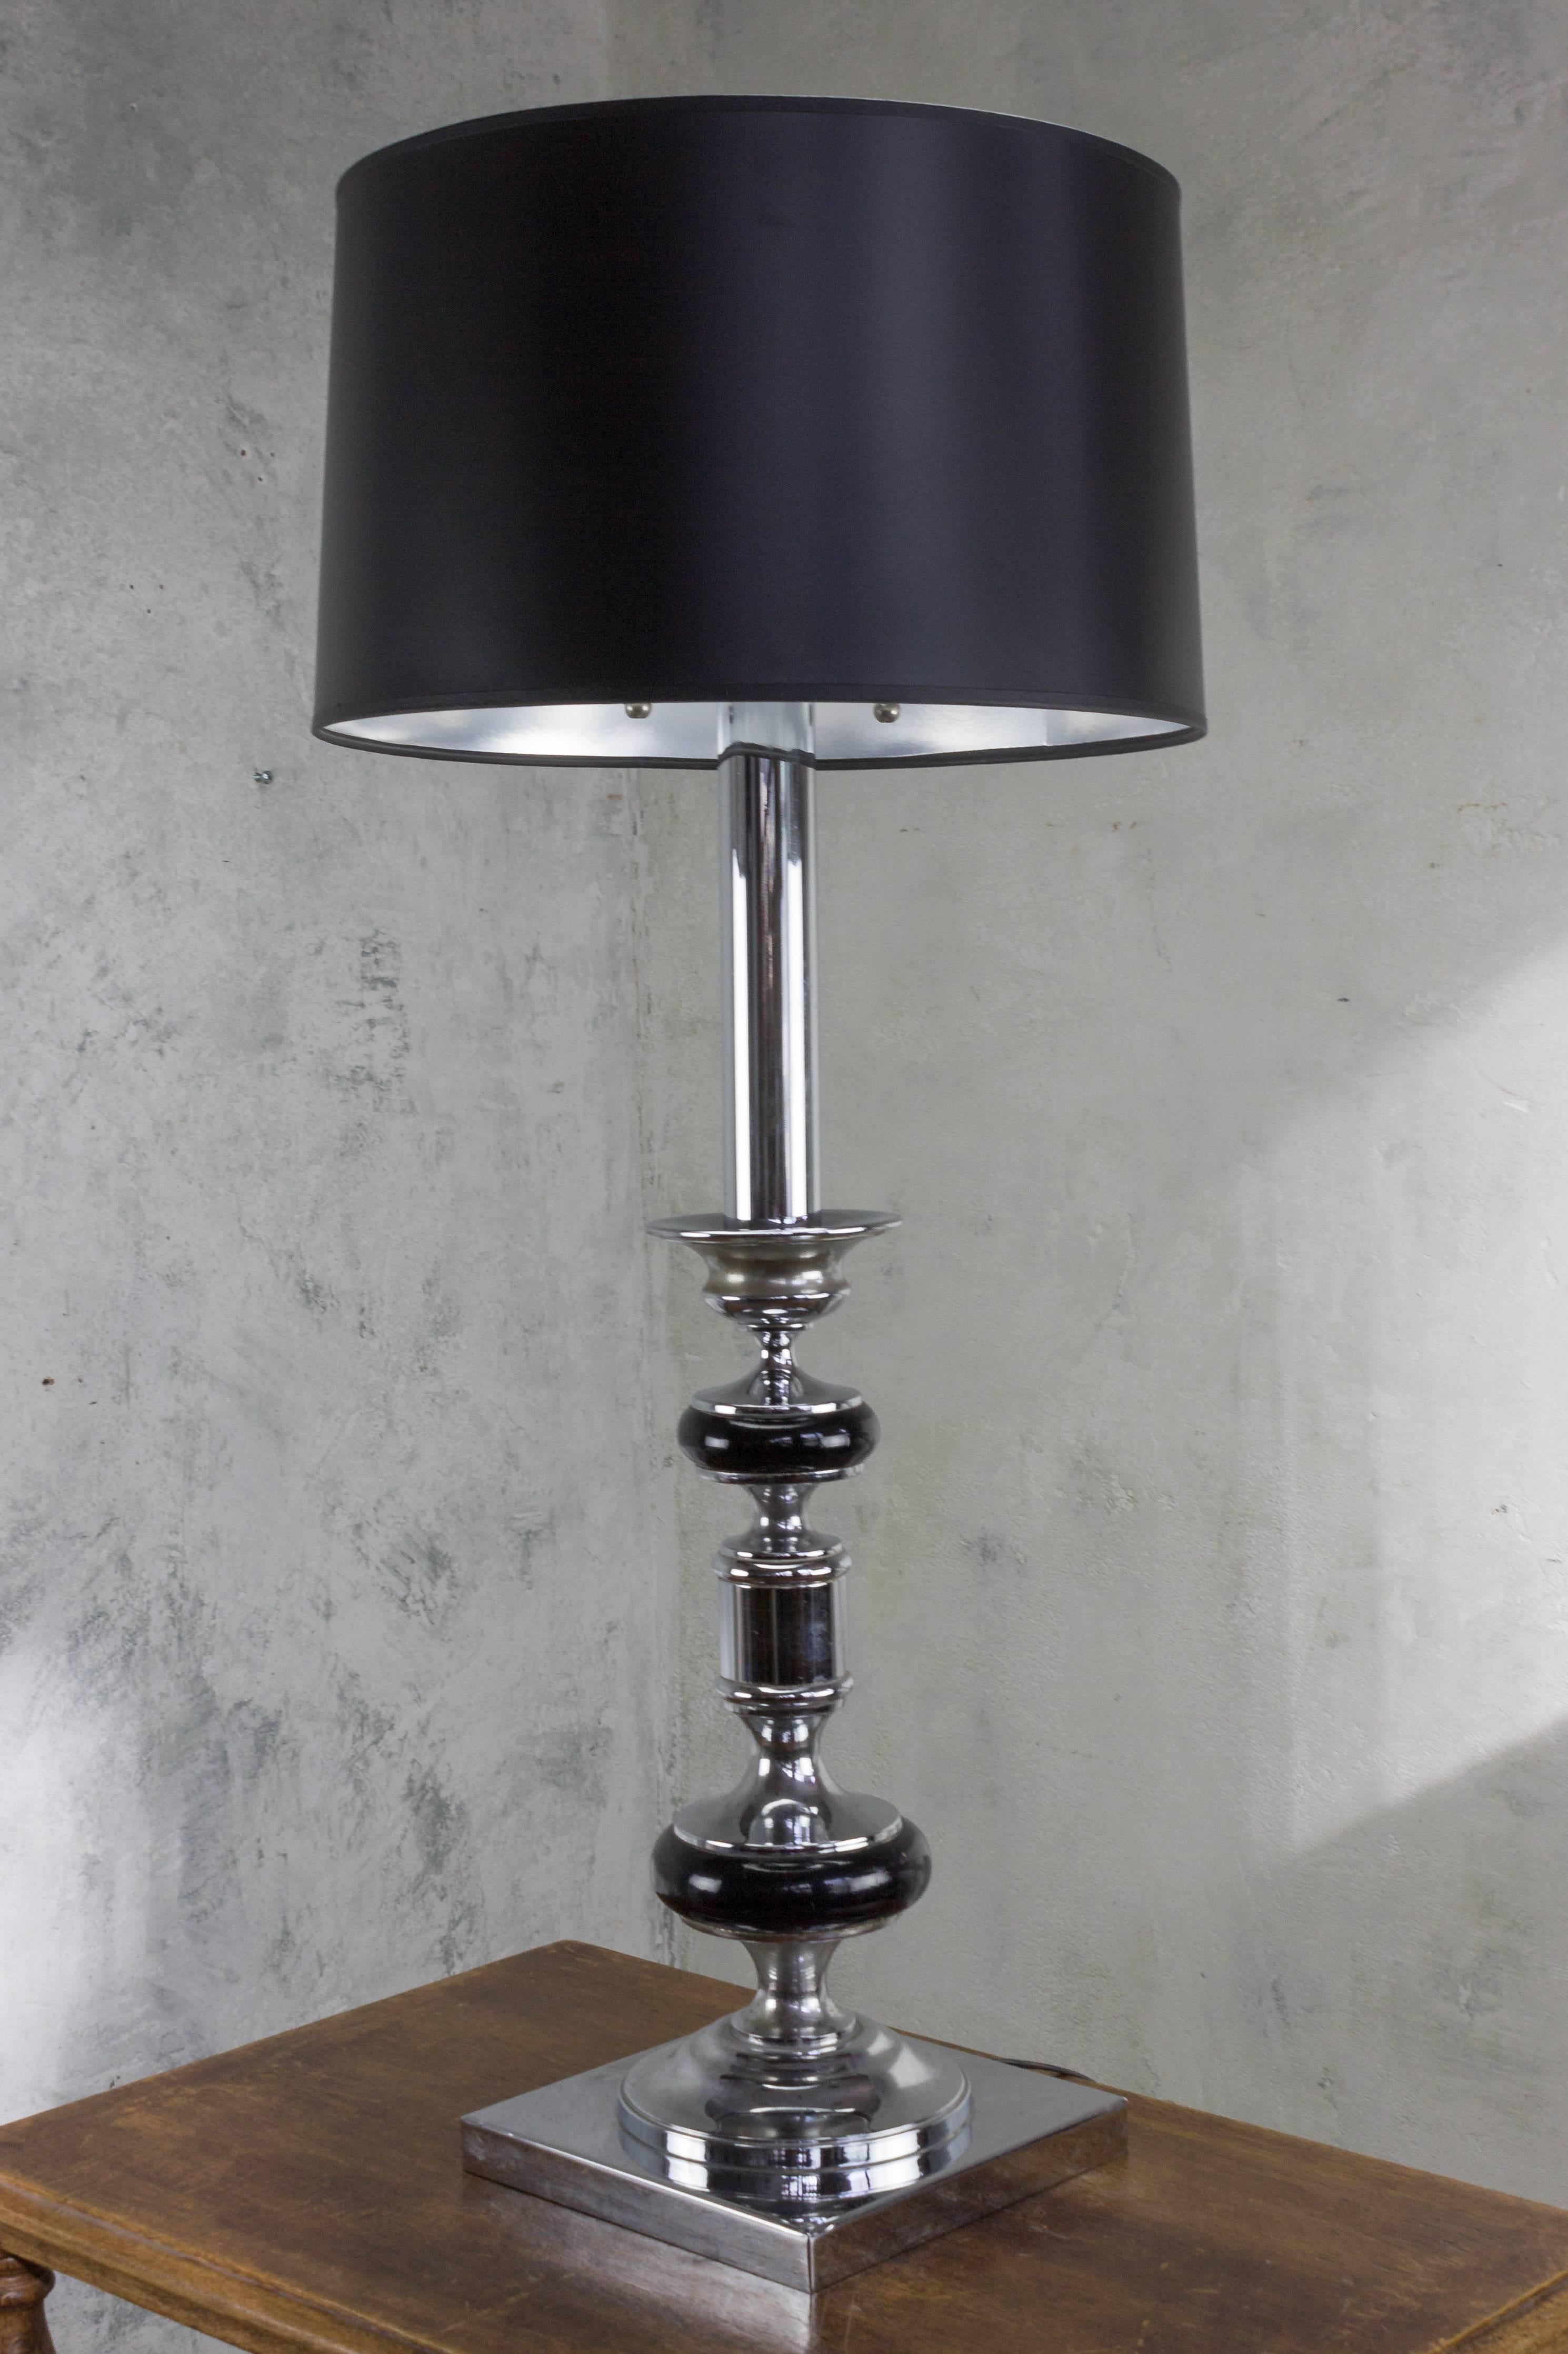 French 1960s ebonized wood and nickel plated metal lamp with square base. Very good condition. 

Not sold with shade.

Ref #: LT1203-16

Dimensions: 36”H x 9”Square